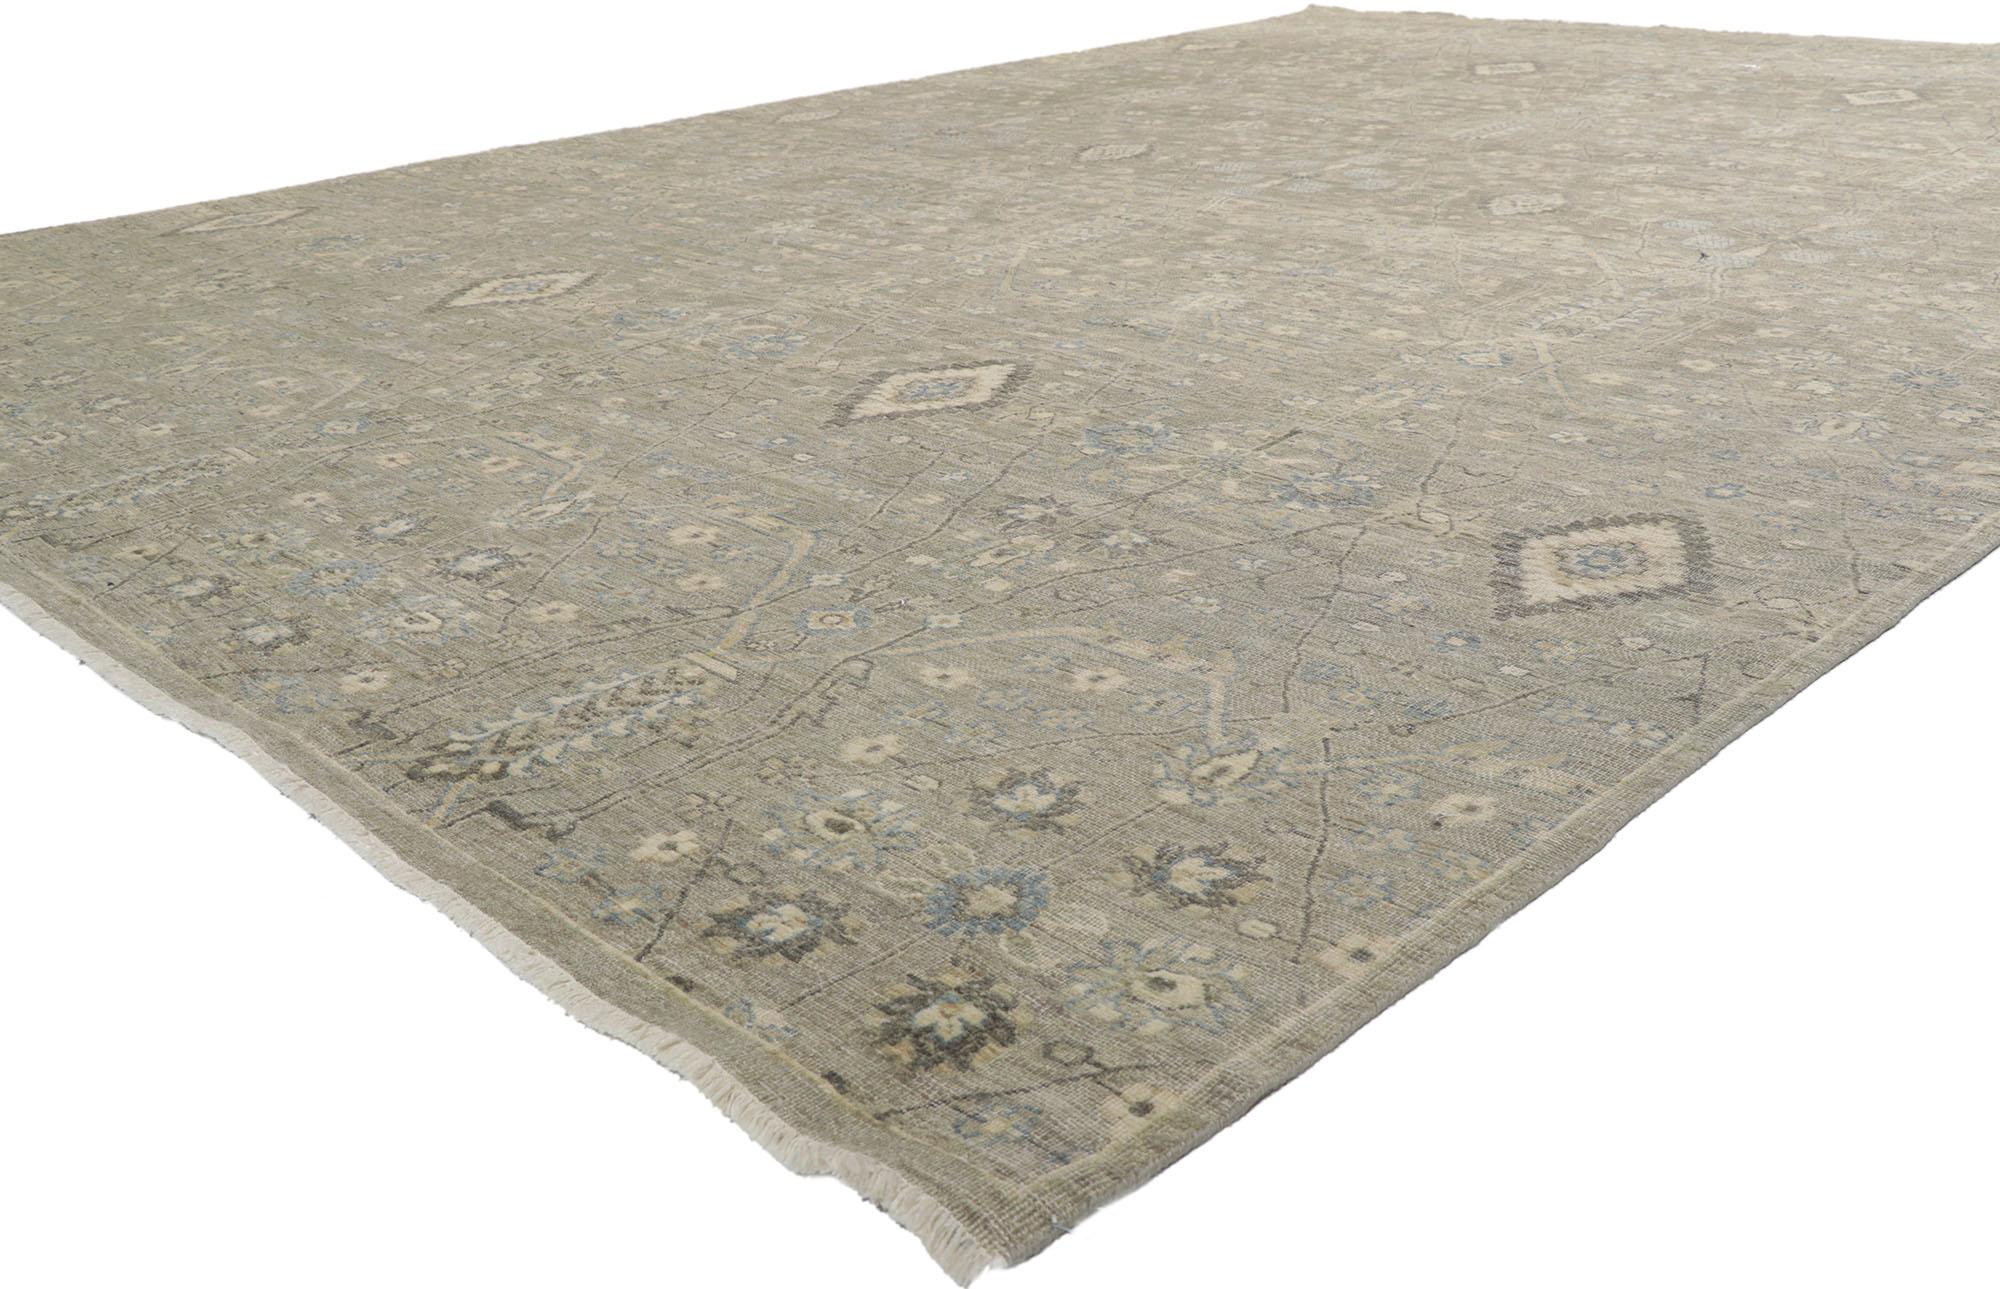 30712 New Contemporary Distressed rug with Modern Style 09'04 x 13'09. With its neutral colors and weathered beauty combined with nostalgic charm, this new contemporary distressed rug creates an inimitable warmth and calming ambiance. The geometric